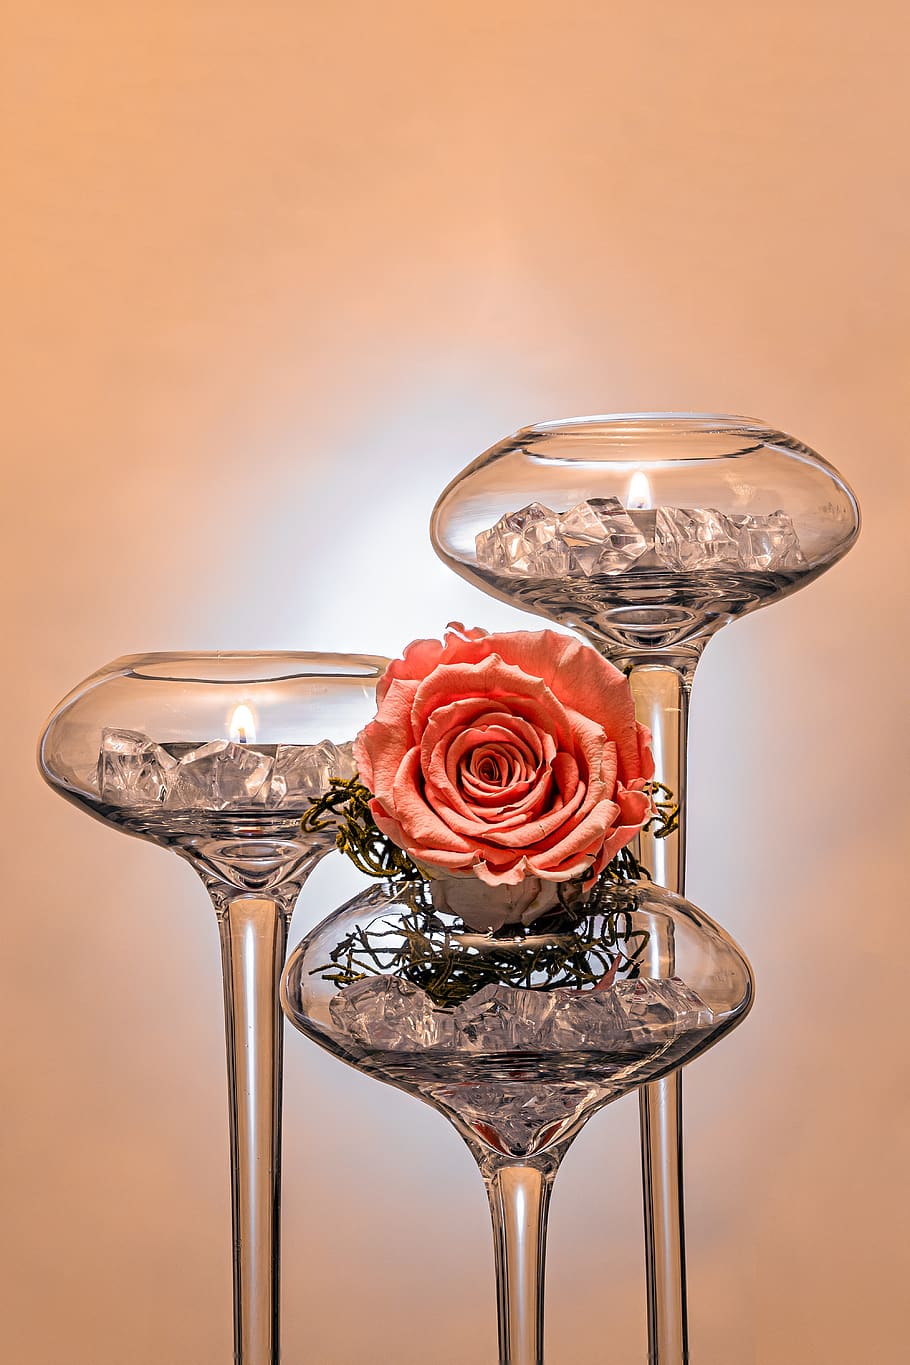 candle holders, glass, rose, light, candlelight, decoration, festive, birthday, fixed, crystal